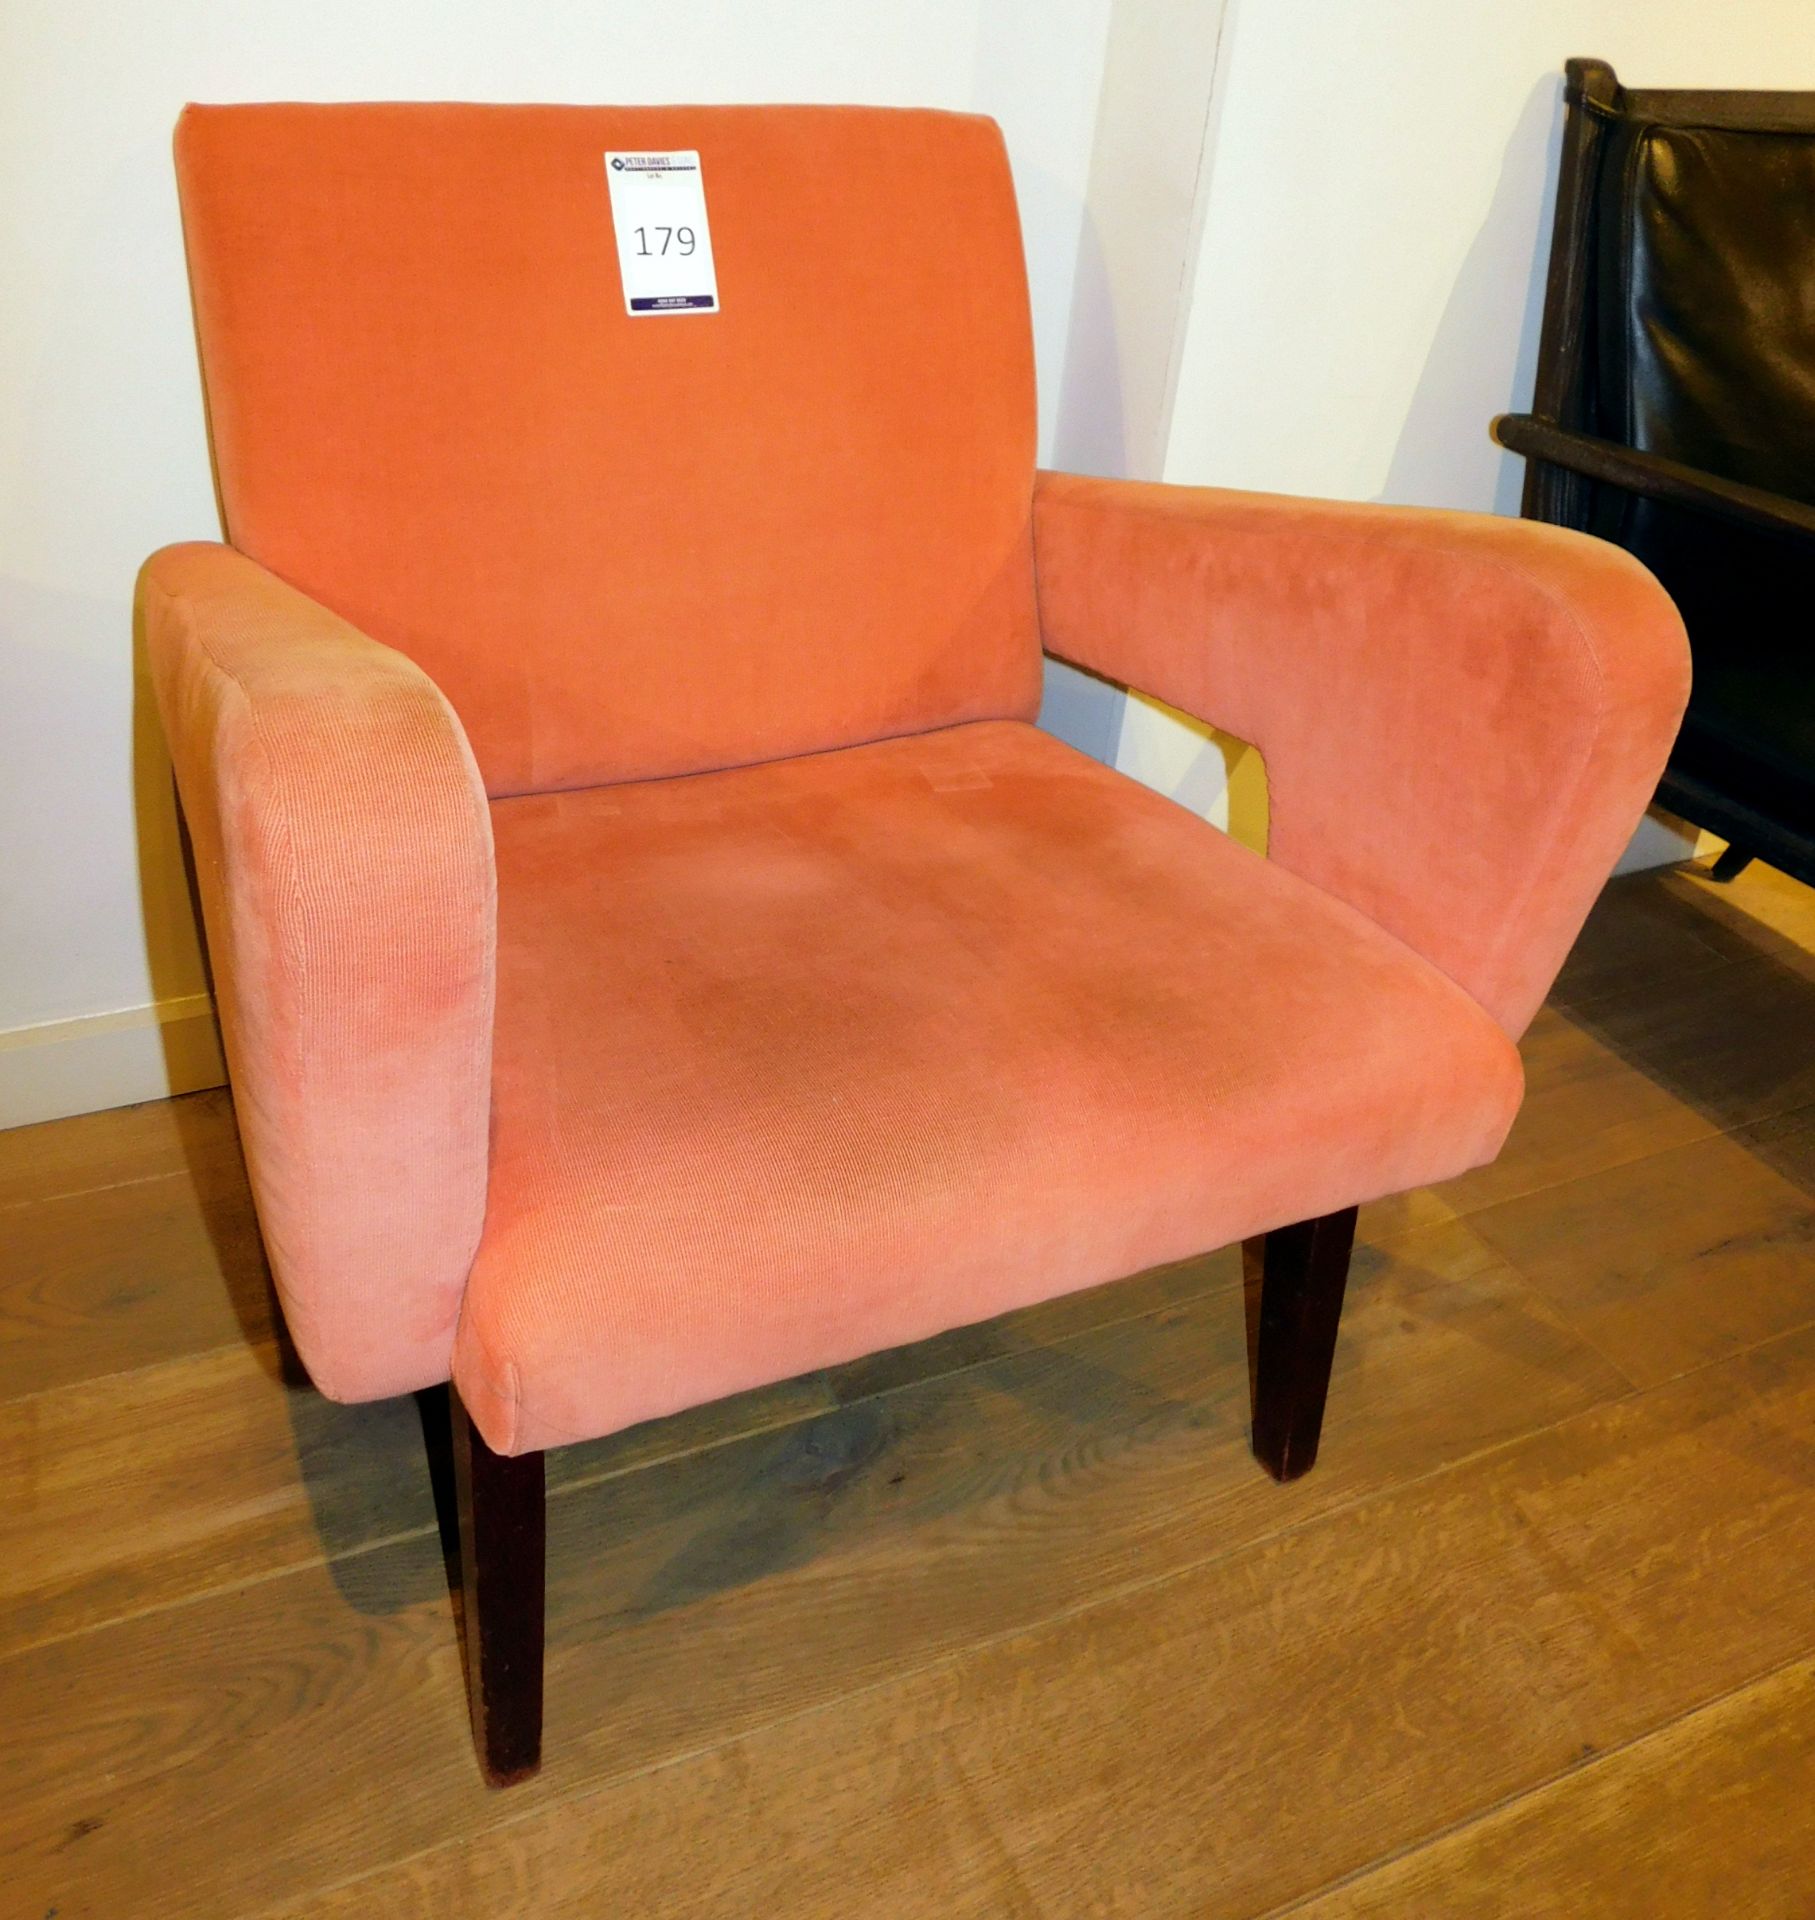 Wooden Framed Armchair, Peach Colour Upholstery (Located at 155 Farringdon Road, London, EC1R 3AF)